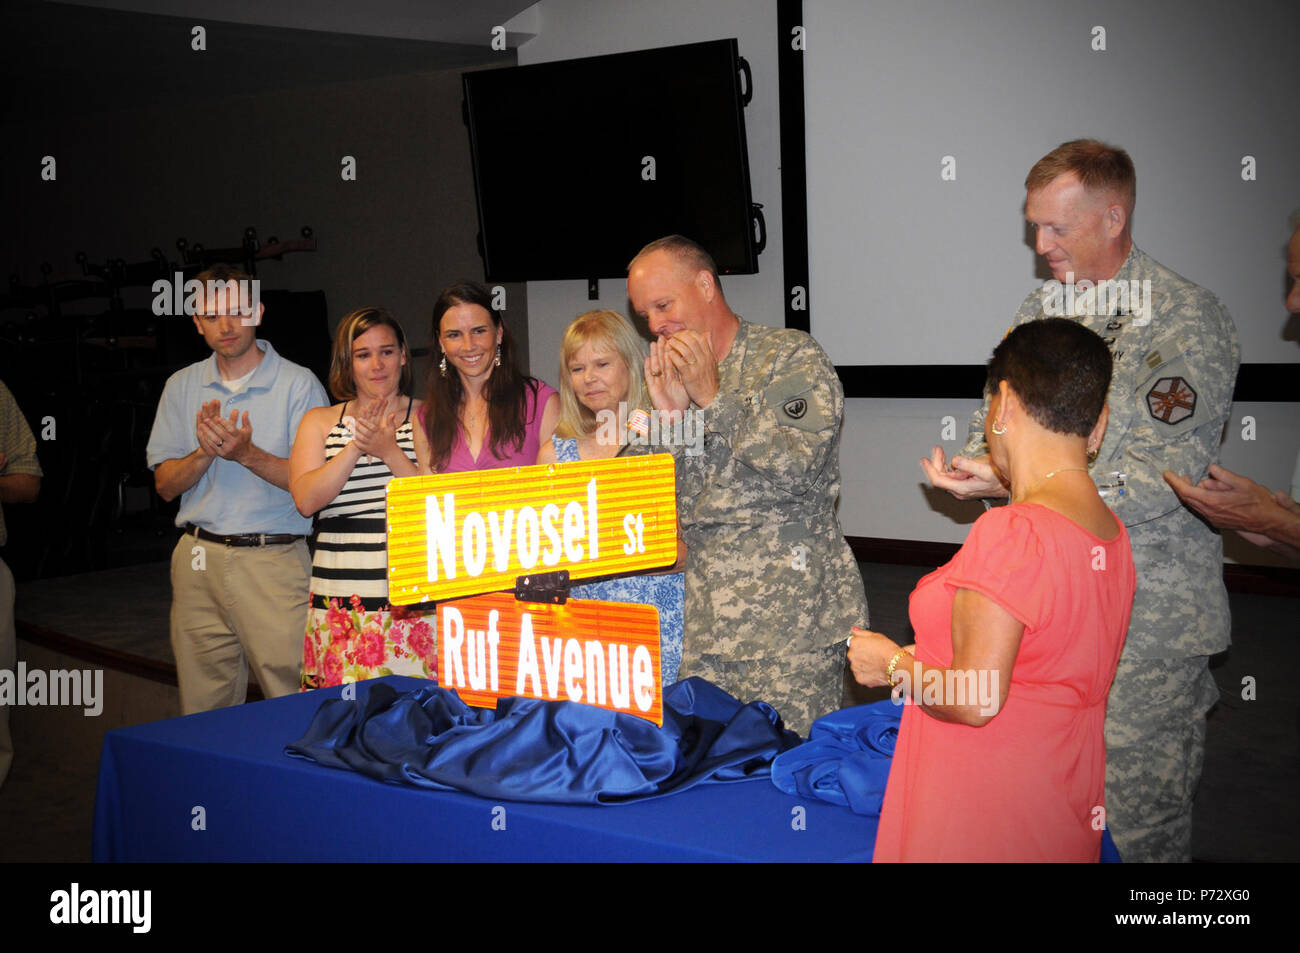 Maj. Gen. Kevin W. Mangum (center), commanding general of the U.S. Army Aviation Center of Excellence, and Family members of CW4 William “Willie” L. Ruf unveil a street sign dedicated in Ruf’s honor at Fort Rucker headquarters.  Fort Rucker’s 5th Avenue was renamed Ruf Avenue June 18, 2013. Stock Photo